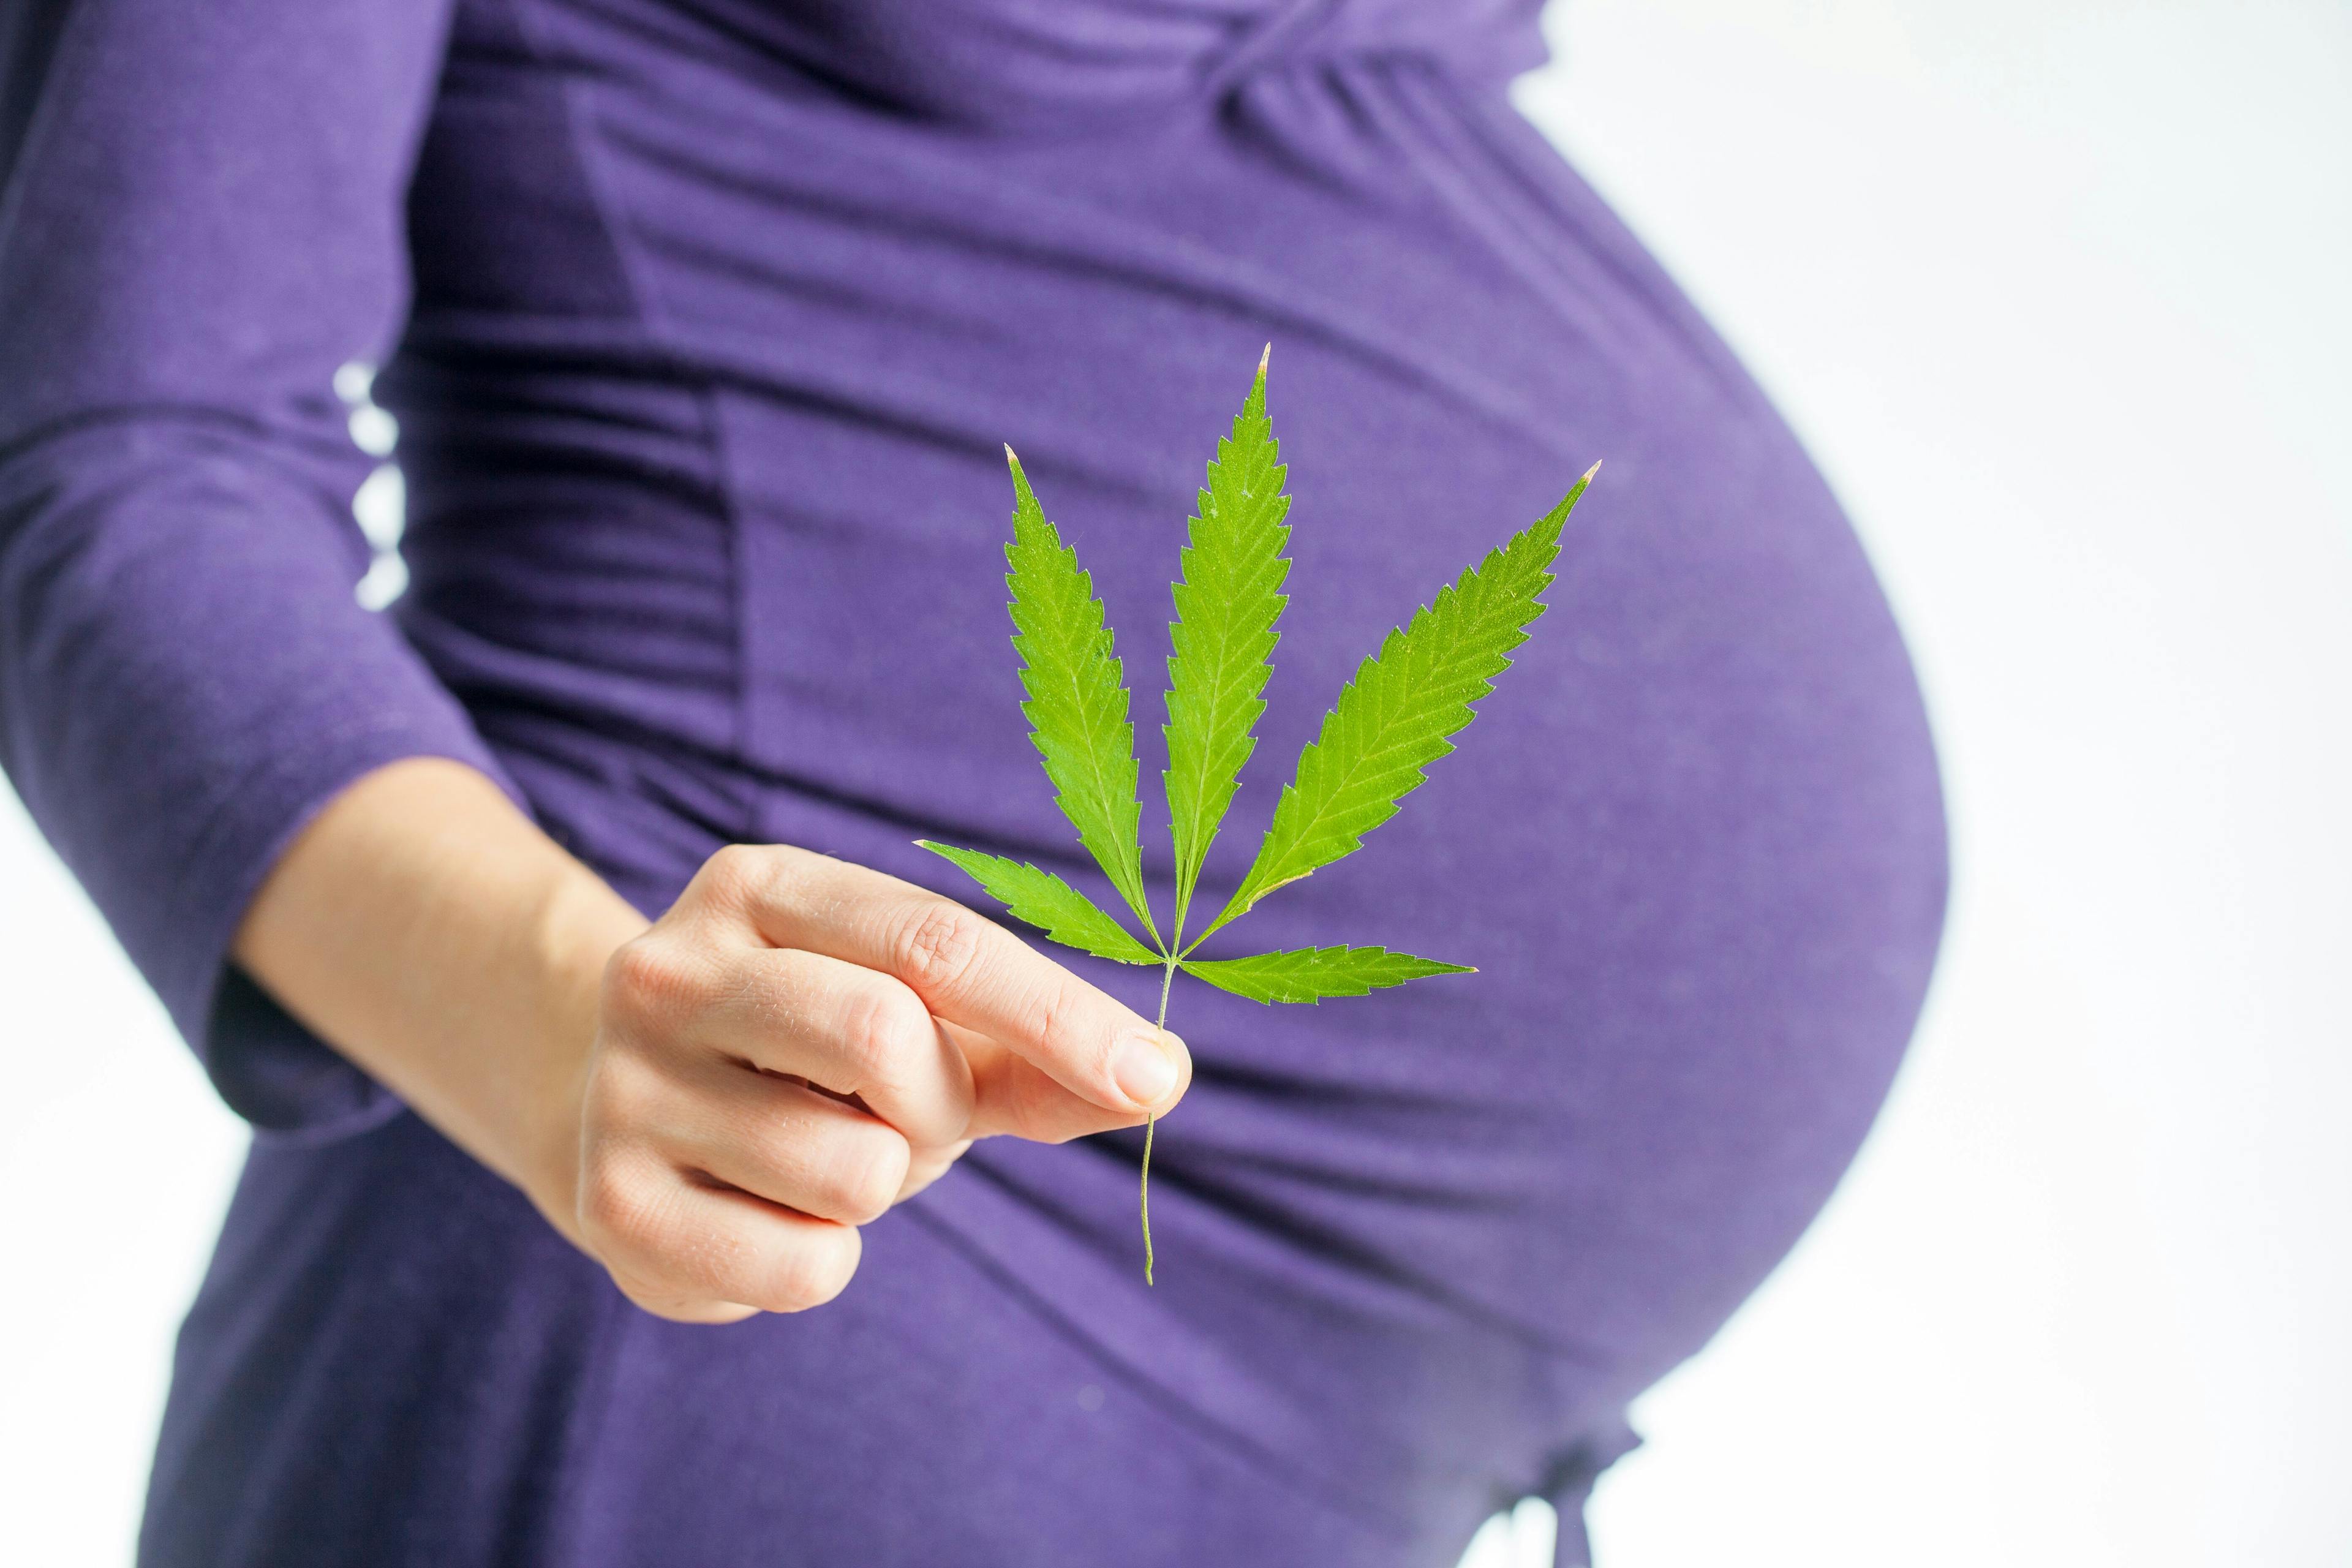 Fetal exposure to marijuana linked to increased fat mass, glucose levels in early life